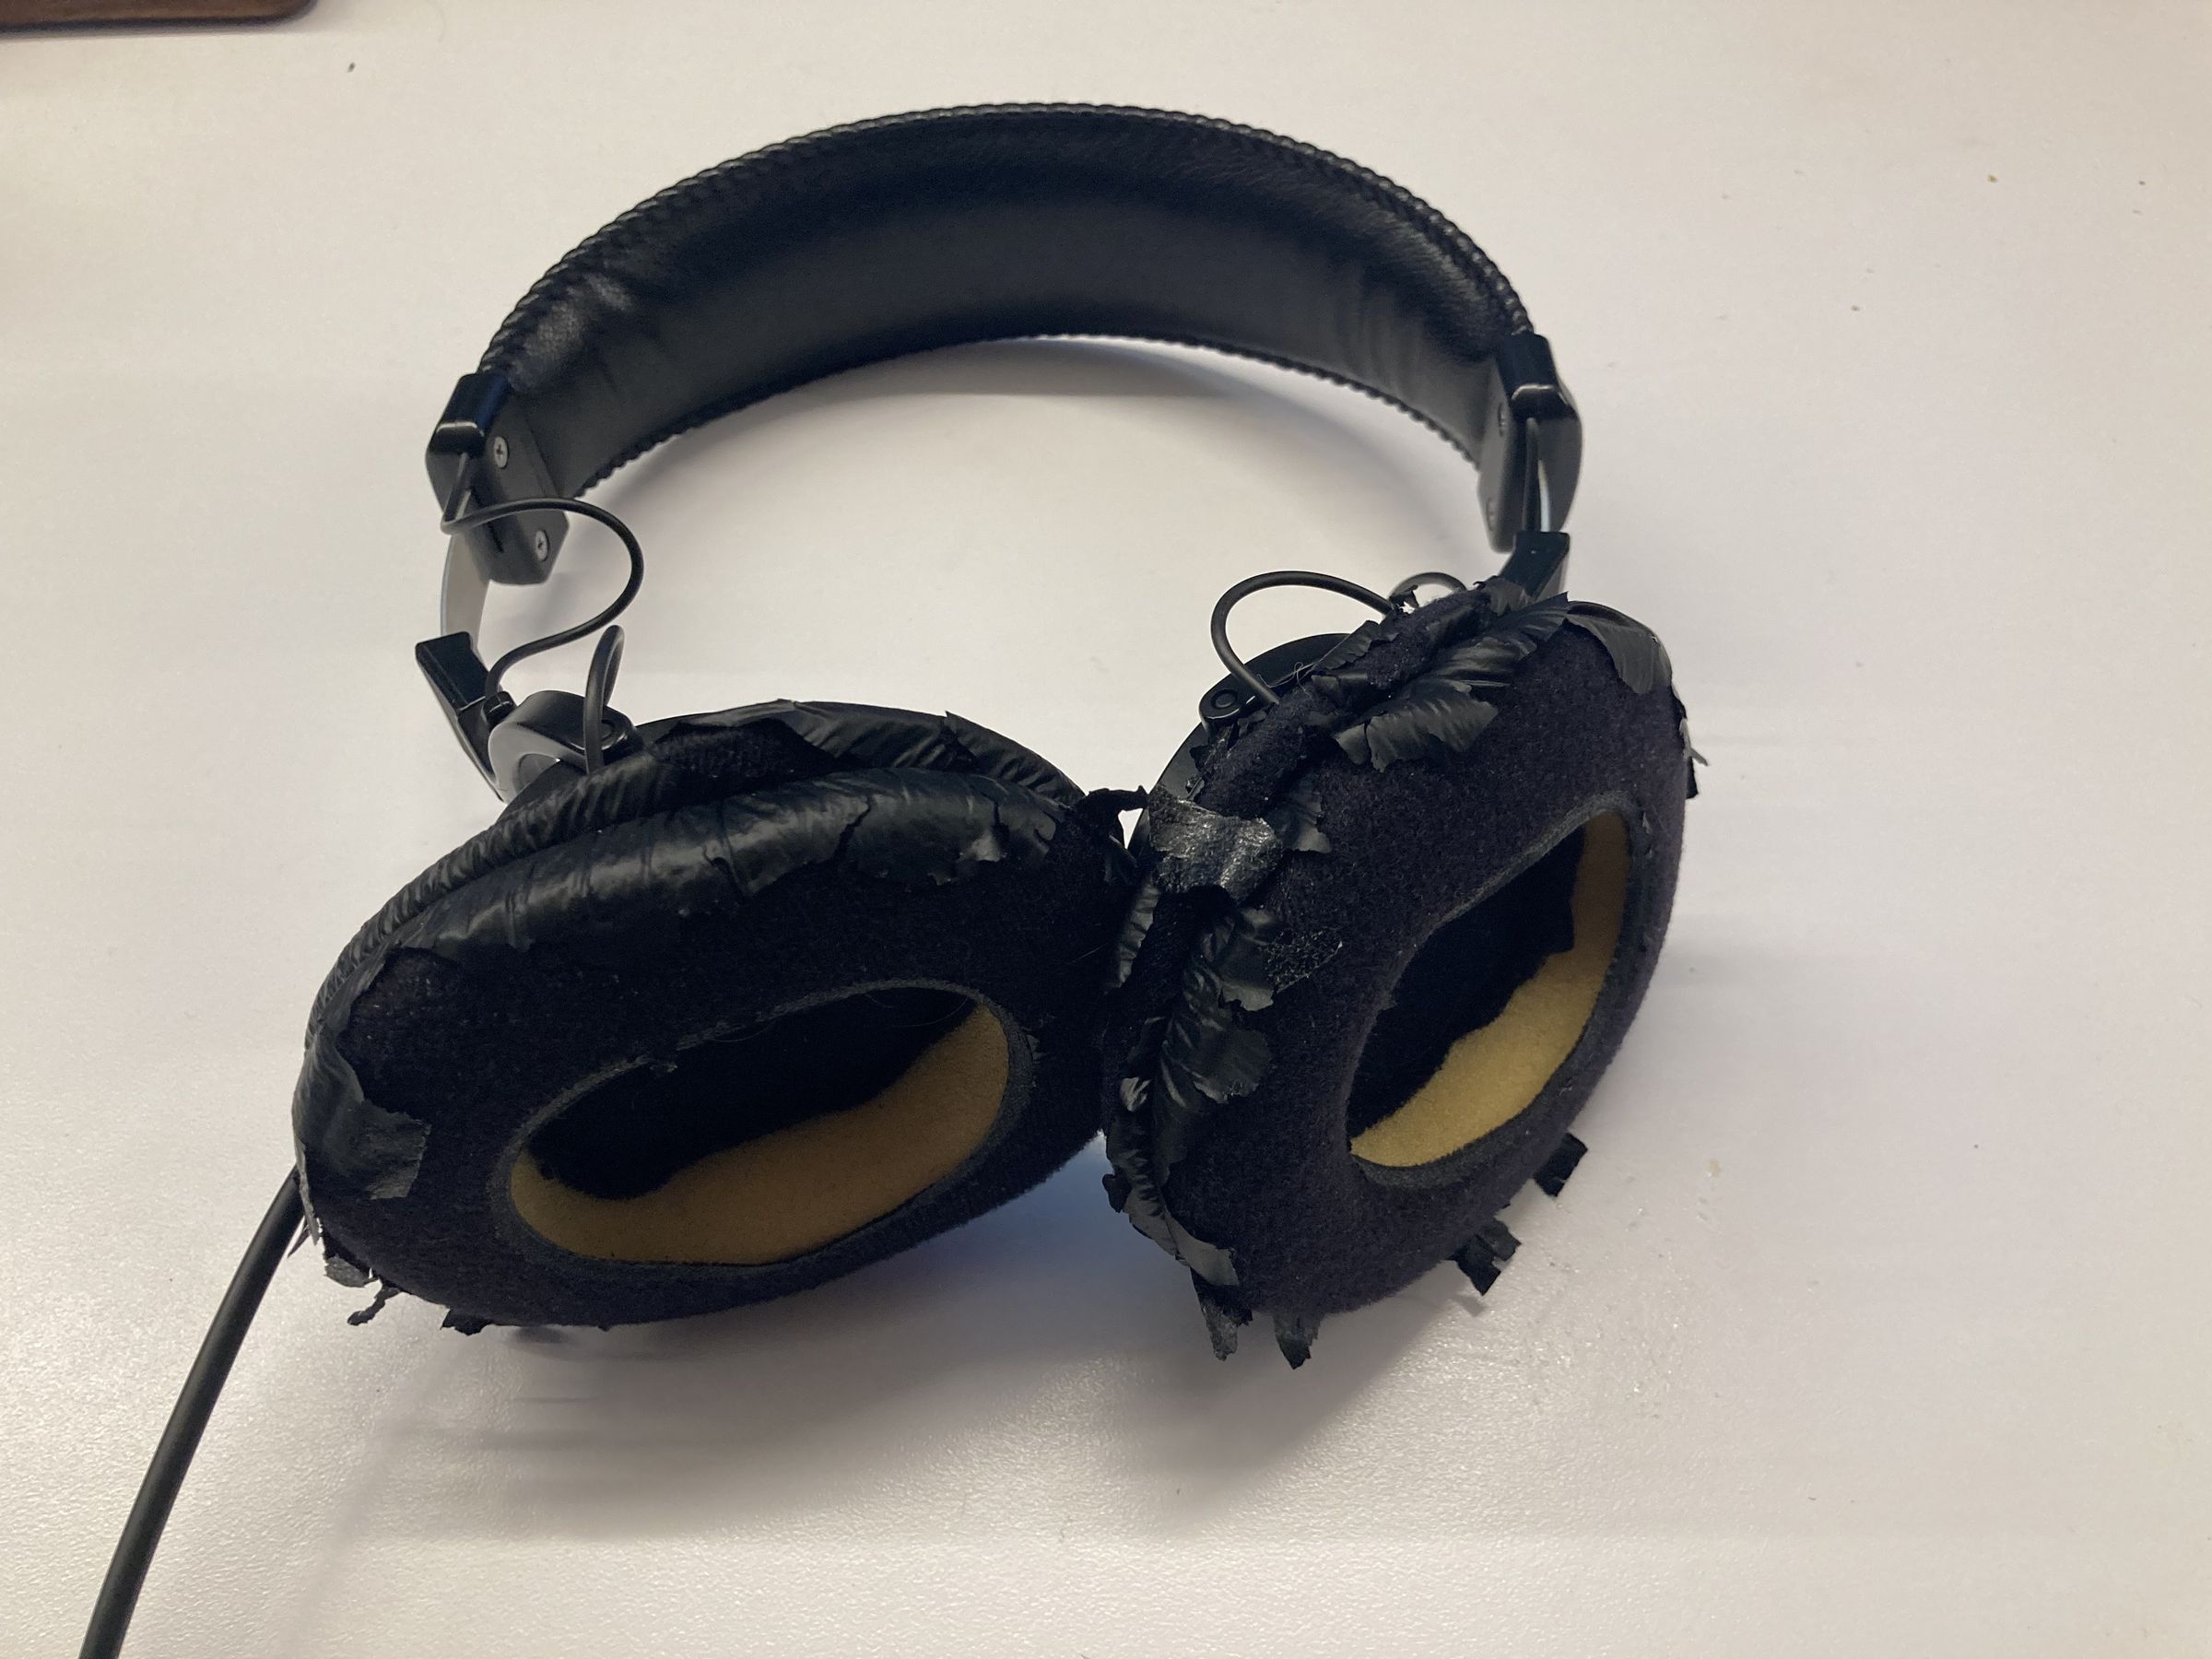 A pair of Sony MDR-7506 with very worn headphone pads.